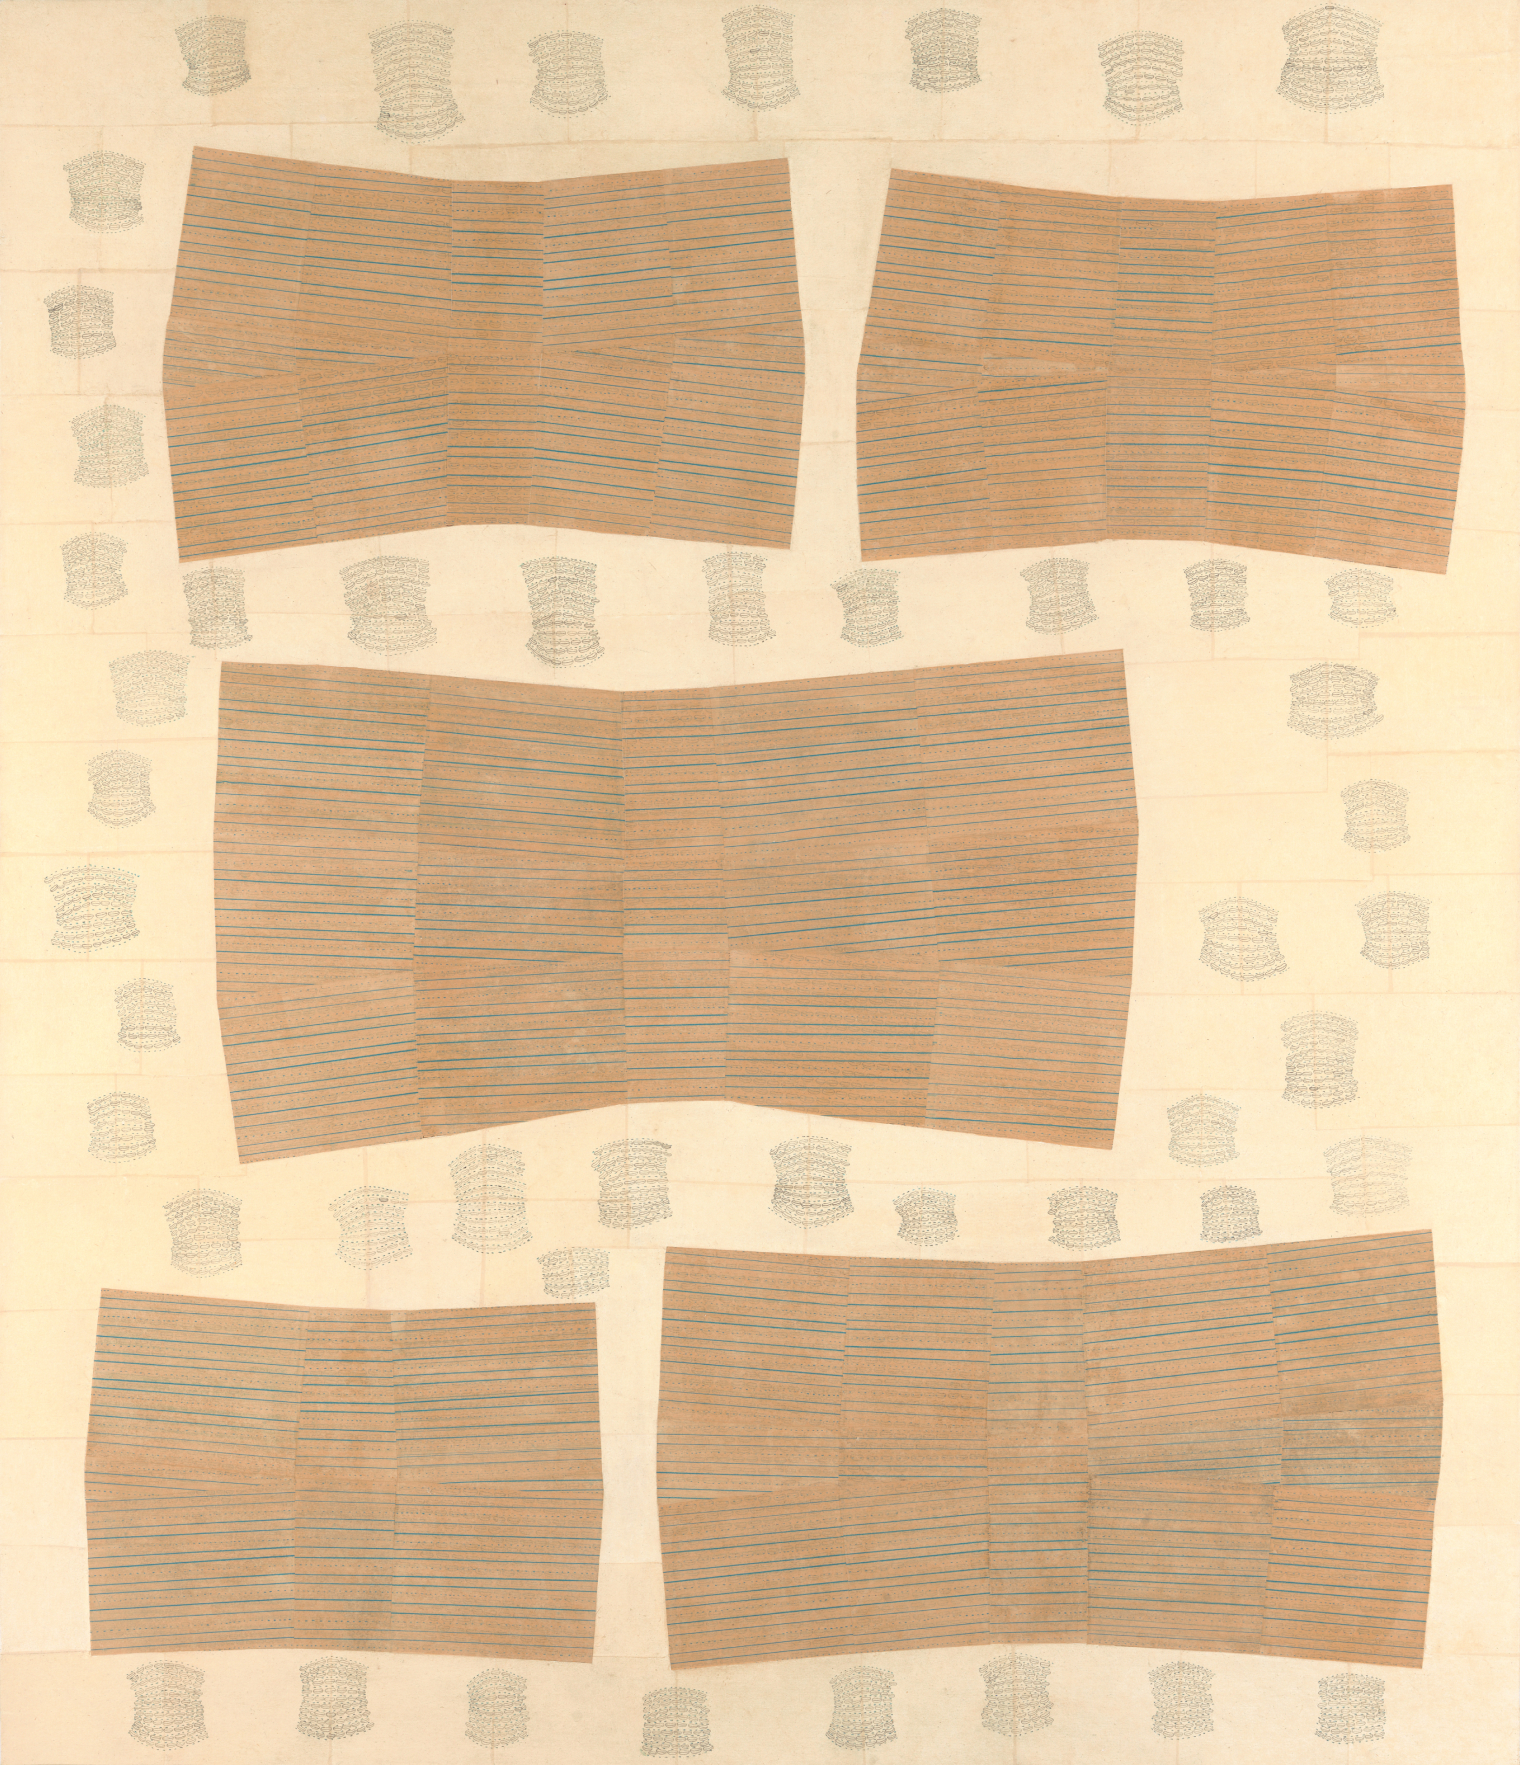 Painting of multiple sheets of drawn paper pasted in rows. Small line drawings of thick lips are embedded throughout this composition 